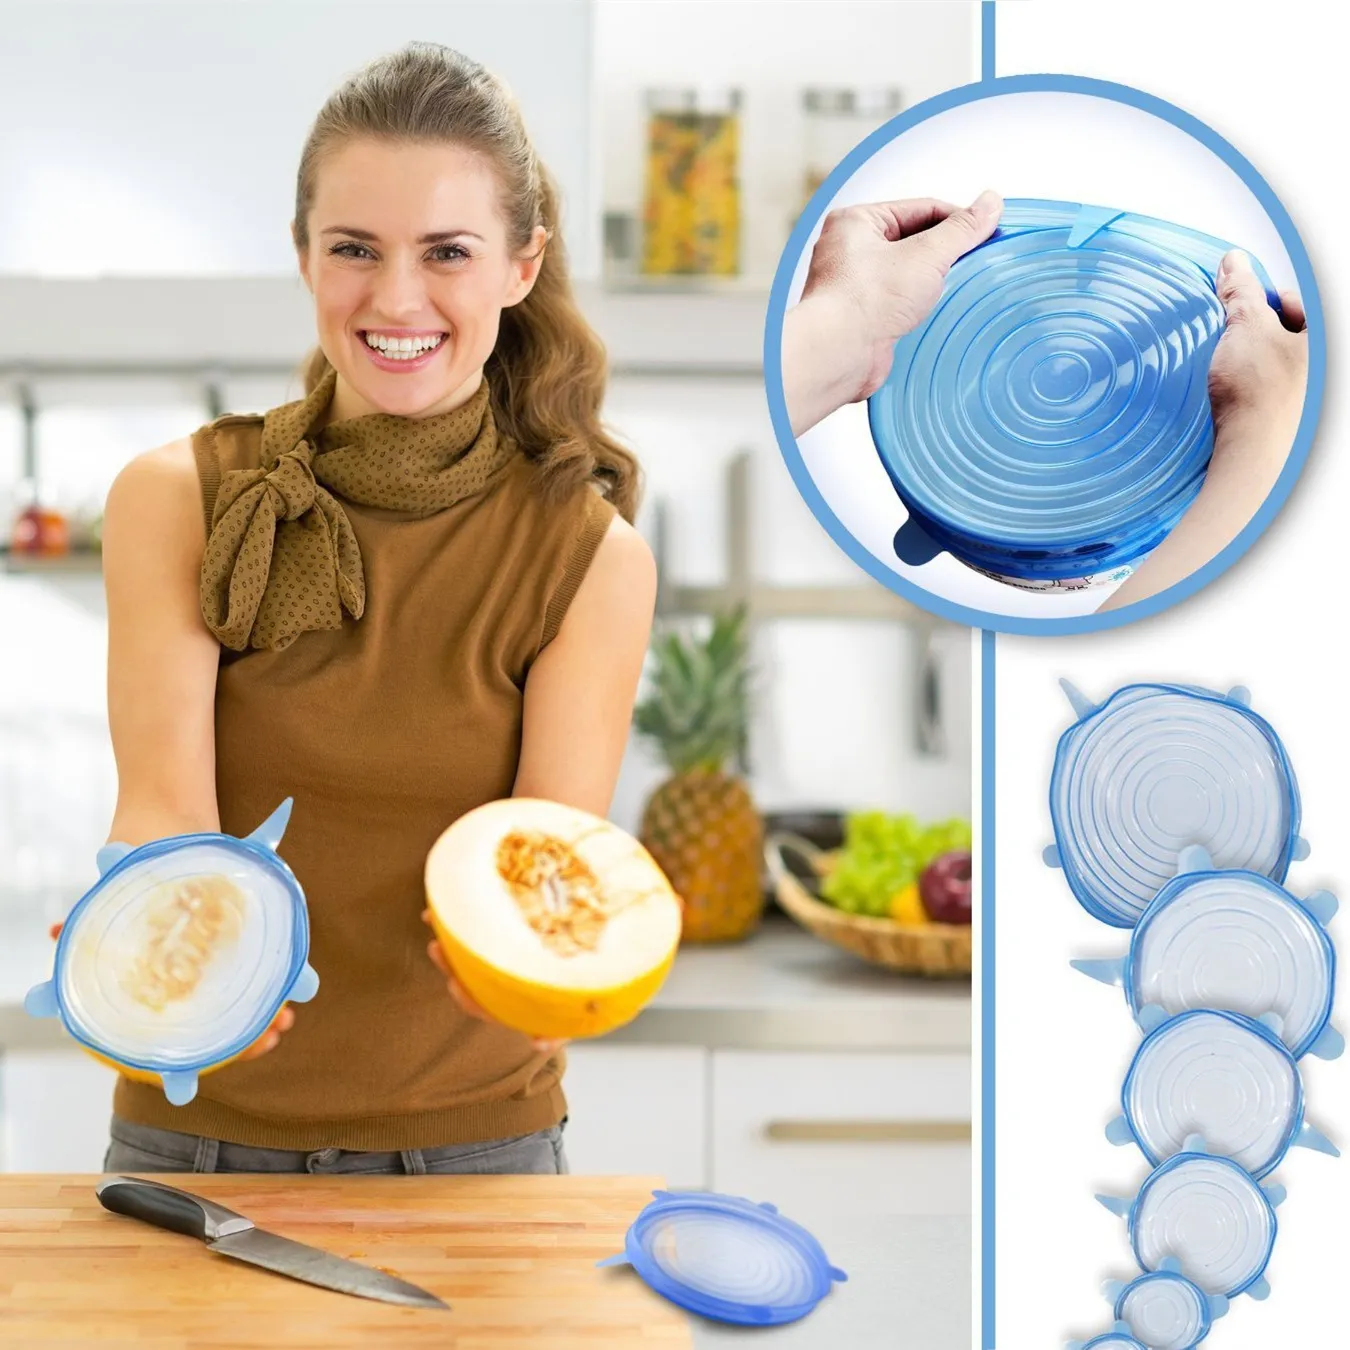 6PCS/SET Silicone Stretch Suction Pot Lids Kitchen Tool Reusable Fresh Keeping Wrap Universal Seal Vegetable and Fruit Lid Pan Cover Stopper Cover